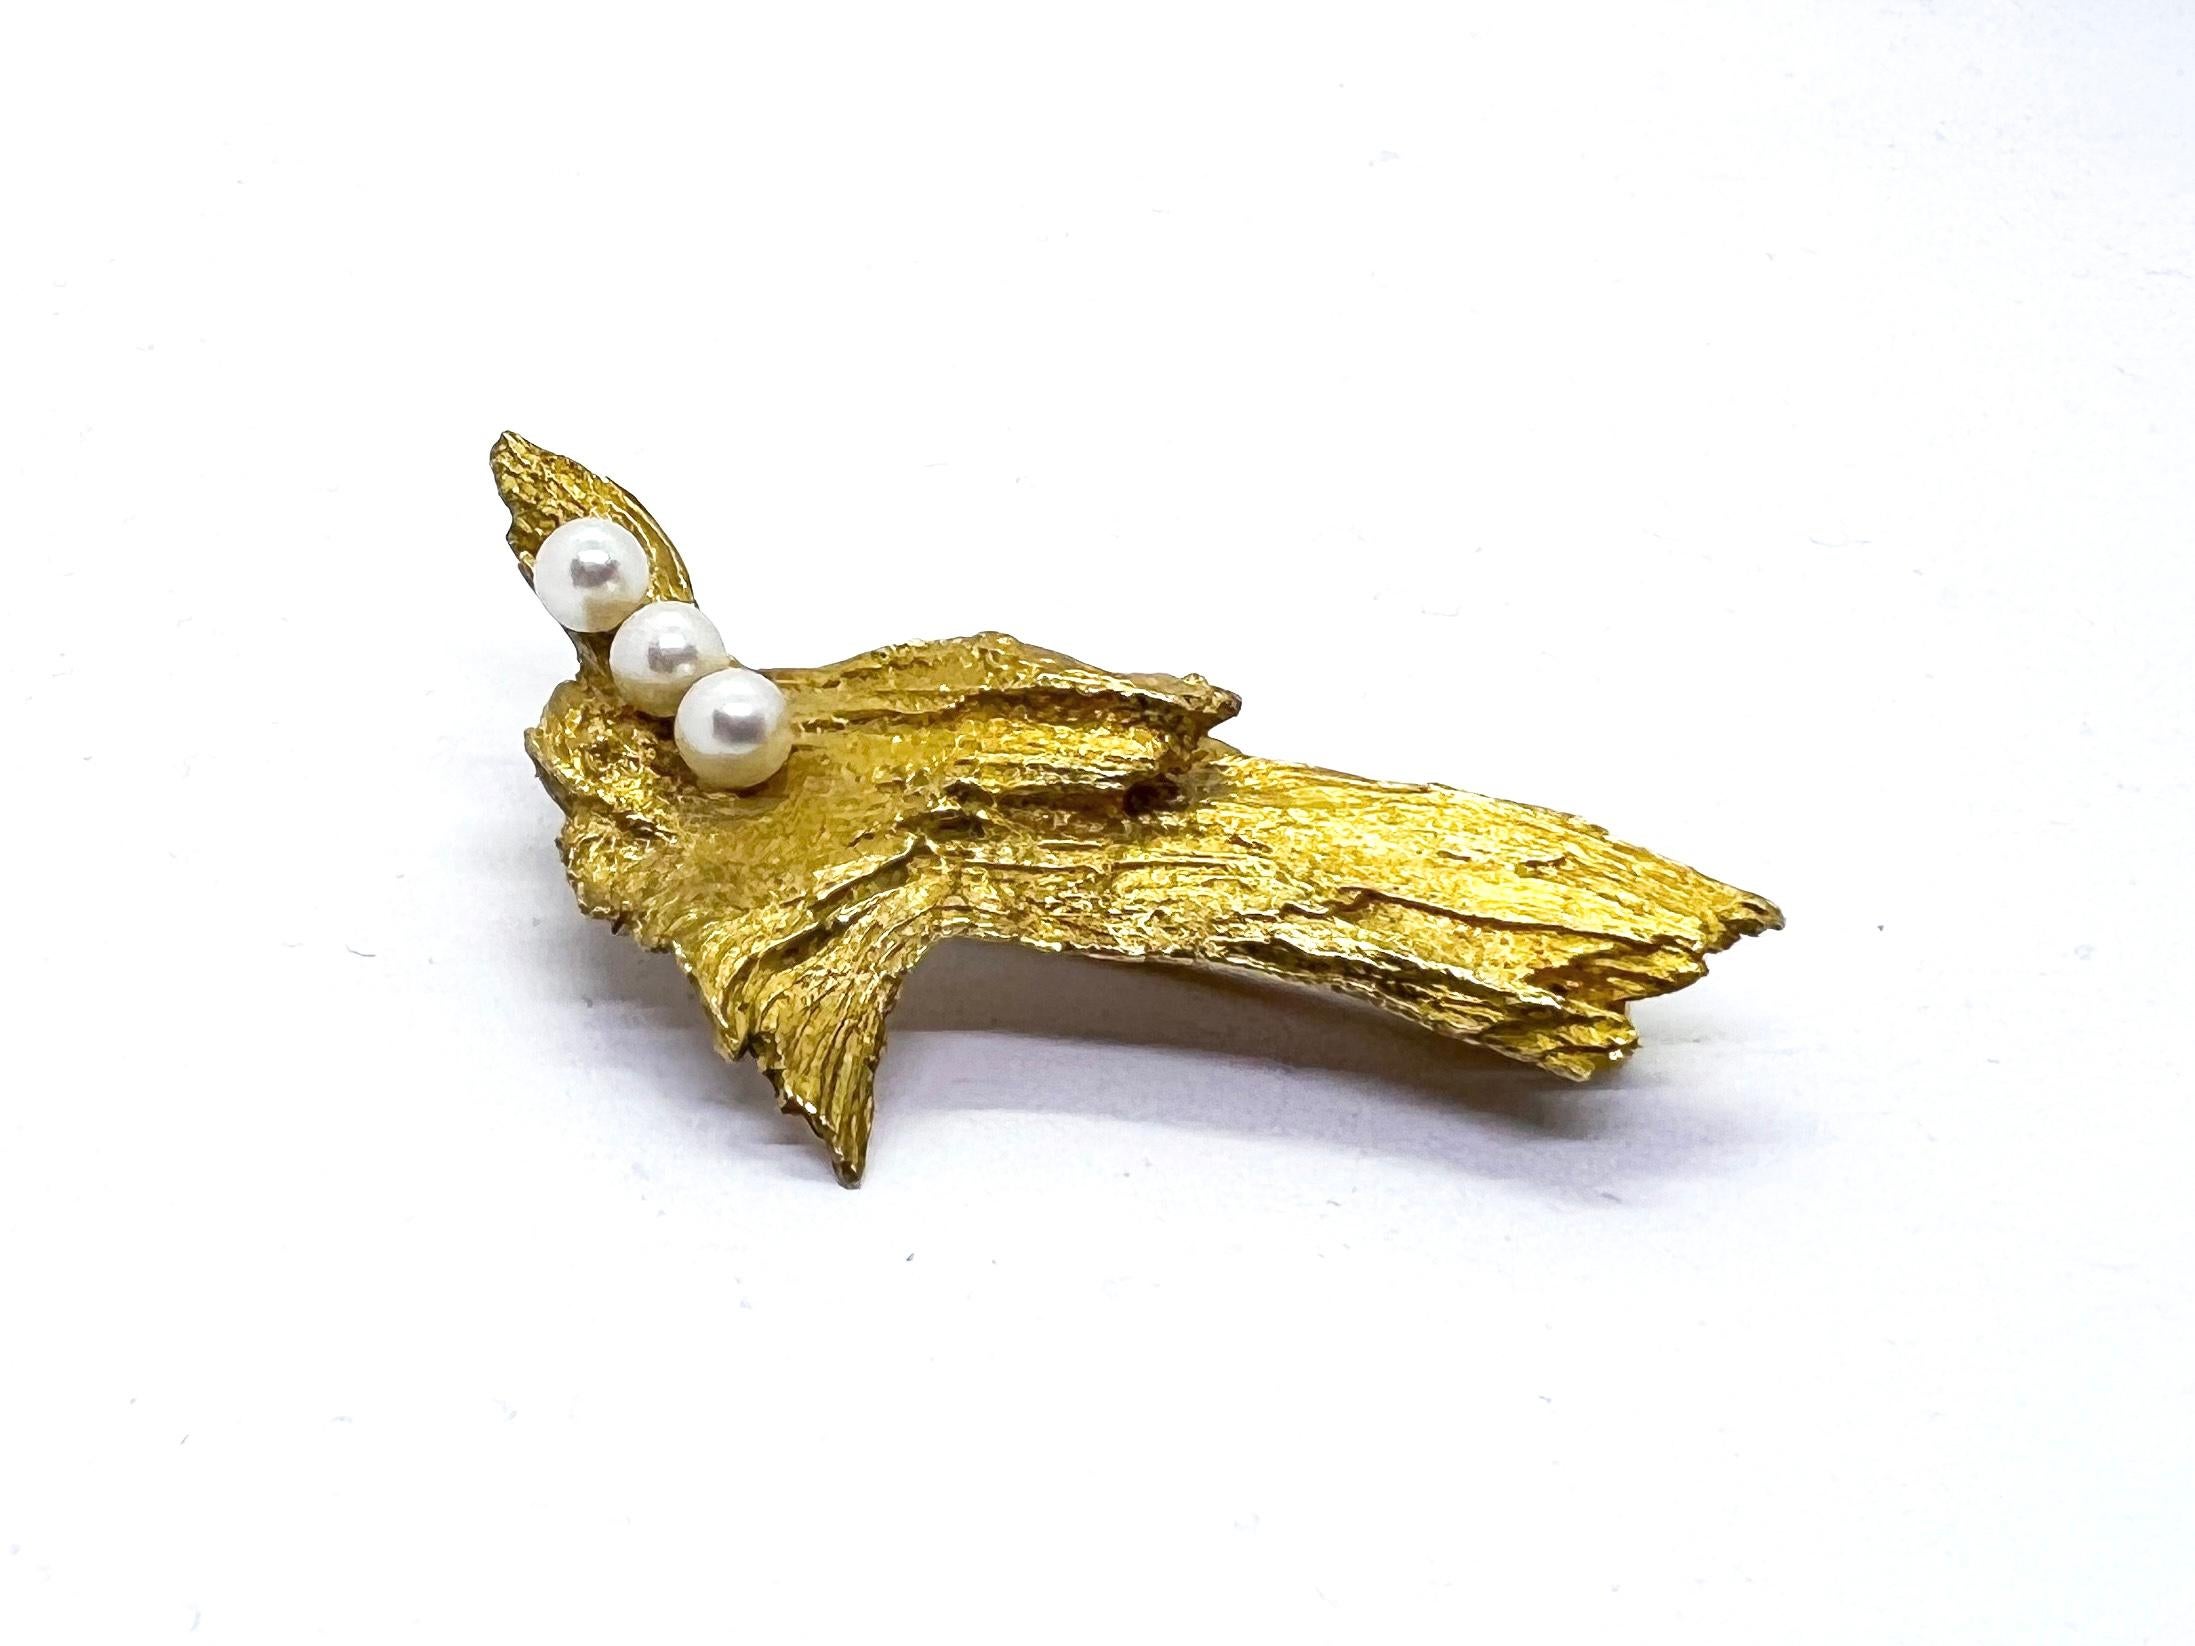 Finland Lapland magic.
14 karat Gold Pearl Brooch Helky Juvonen Design Finland
Brooch made in 1971
Manufactured by Nils Westerback Helsinki
Helky Juvonen's jewelry has the same spirit as the jewelry made by Björn Weckström Lapponia.

I have several